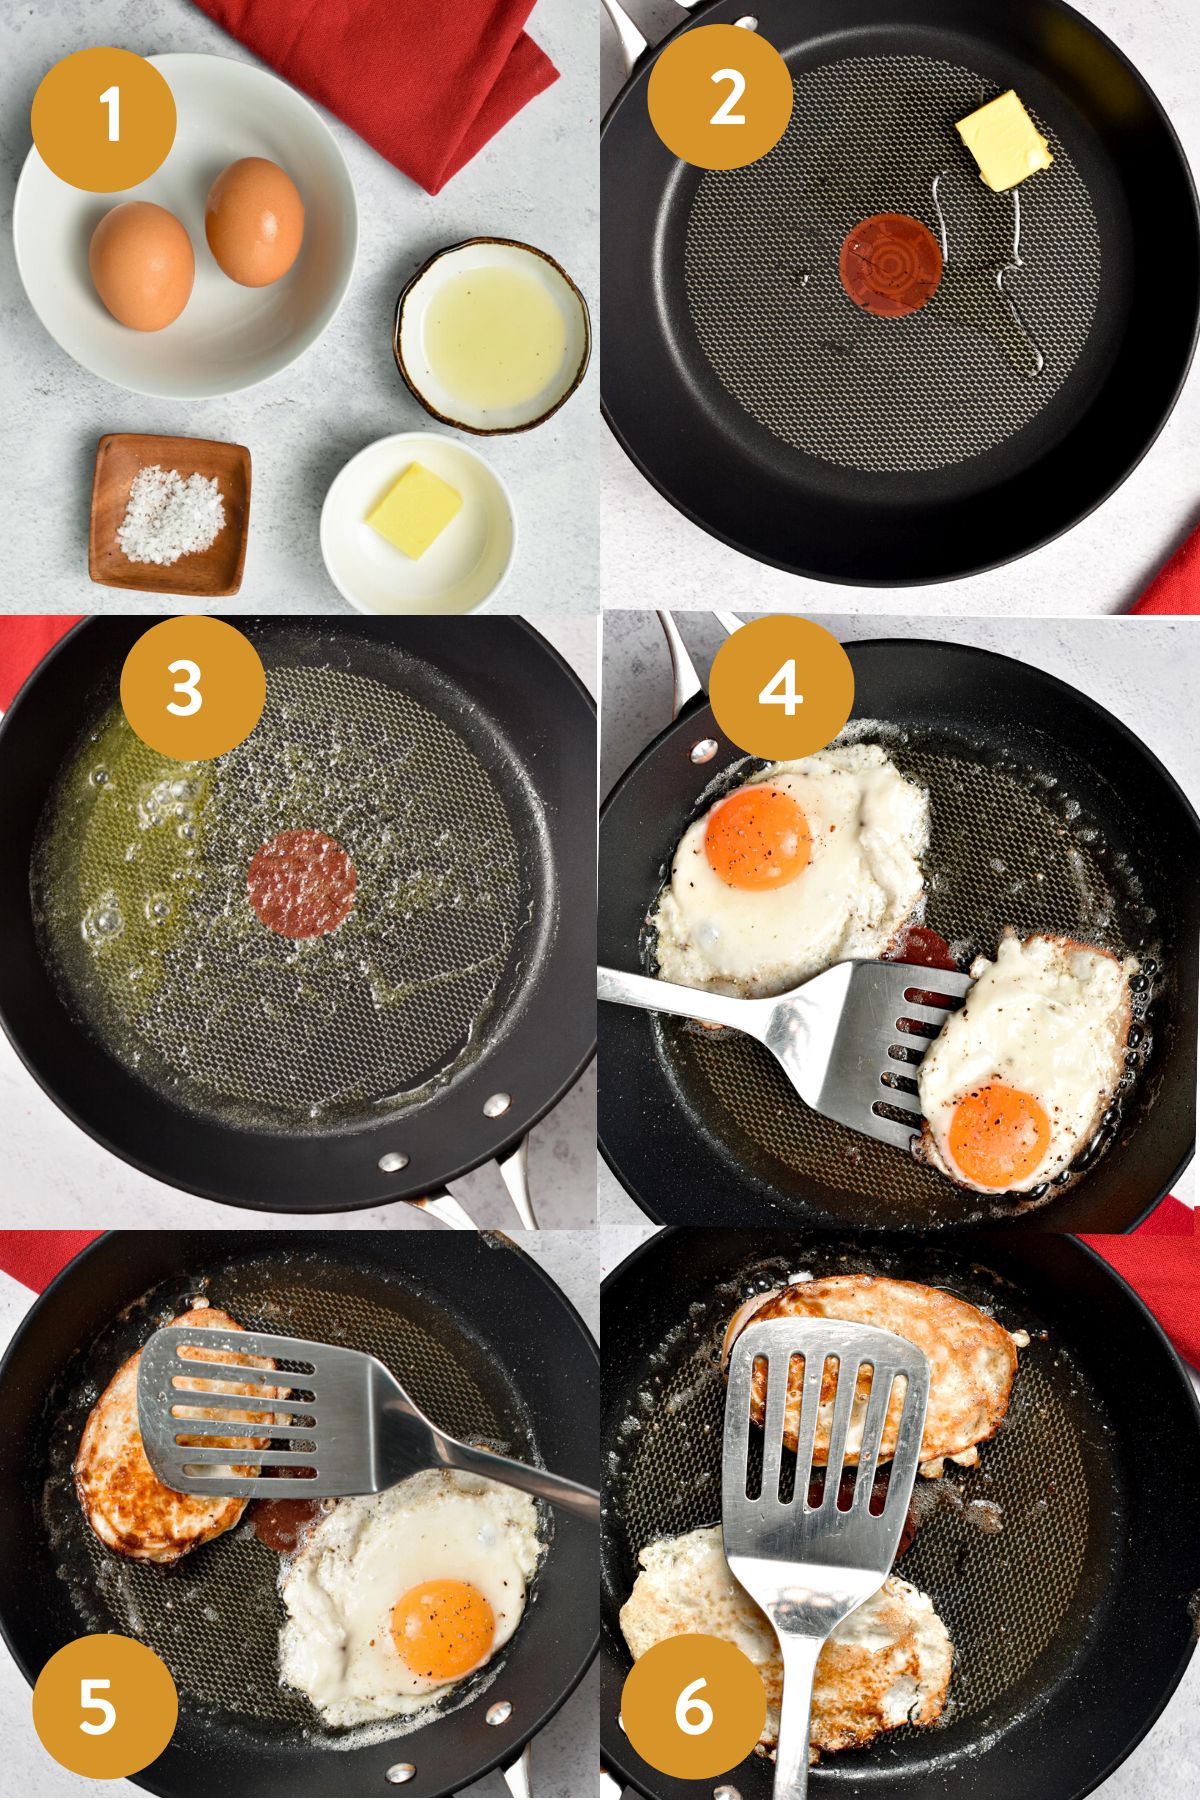 How to make Over Hard Eggs